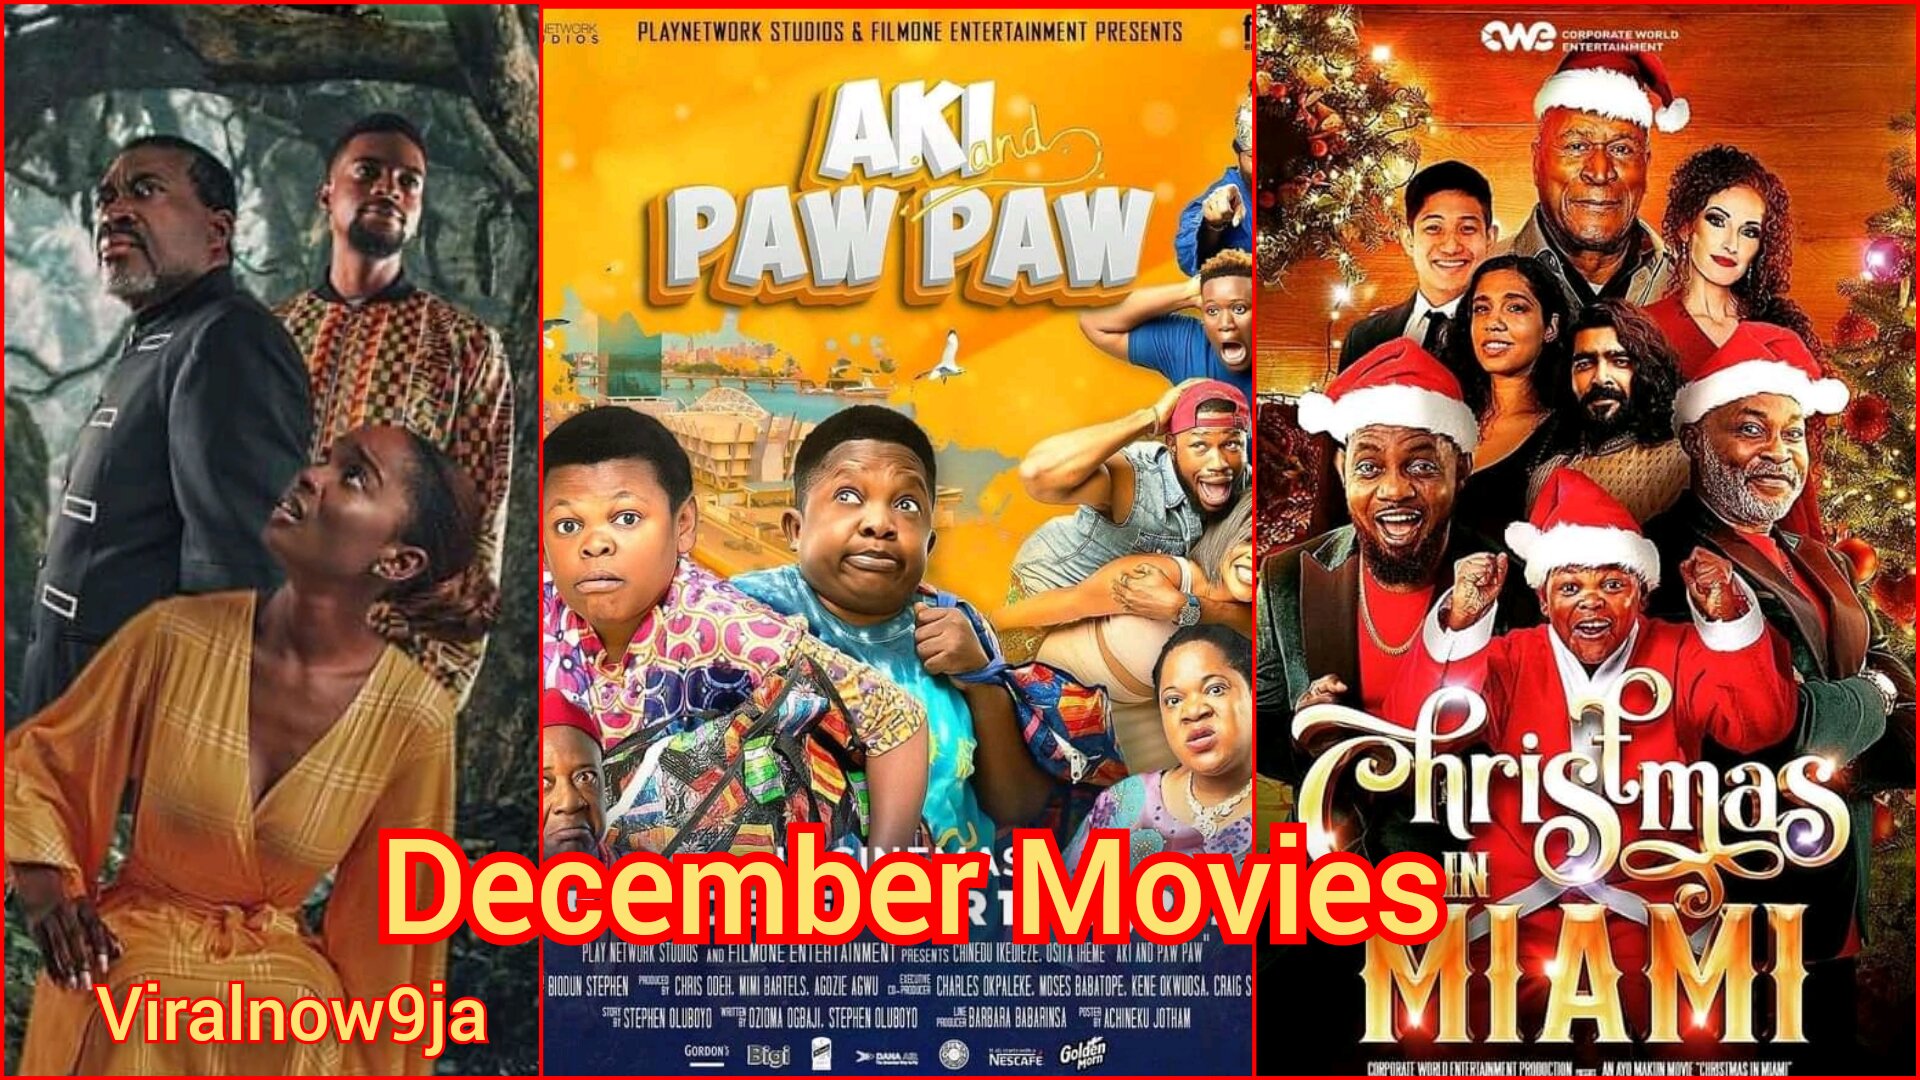 Top 5 best nollywood movies that will be released this December